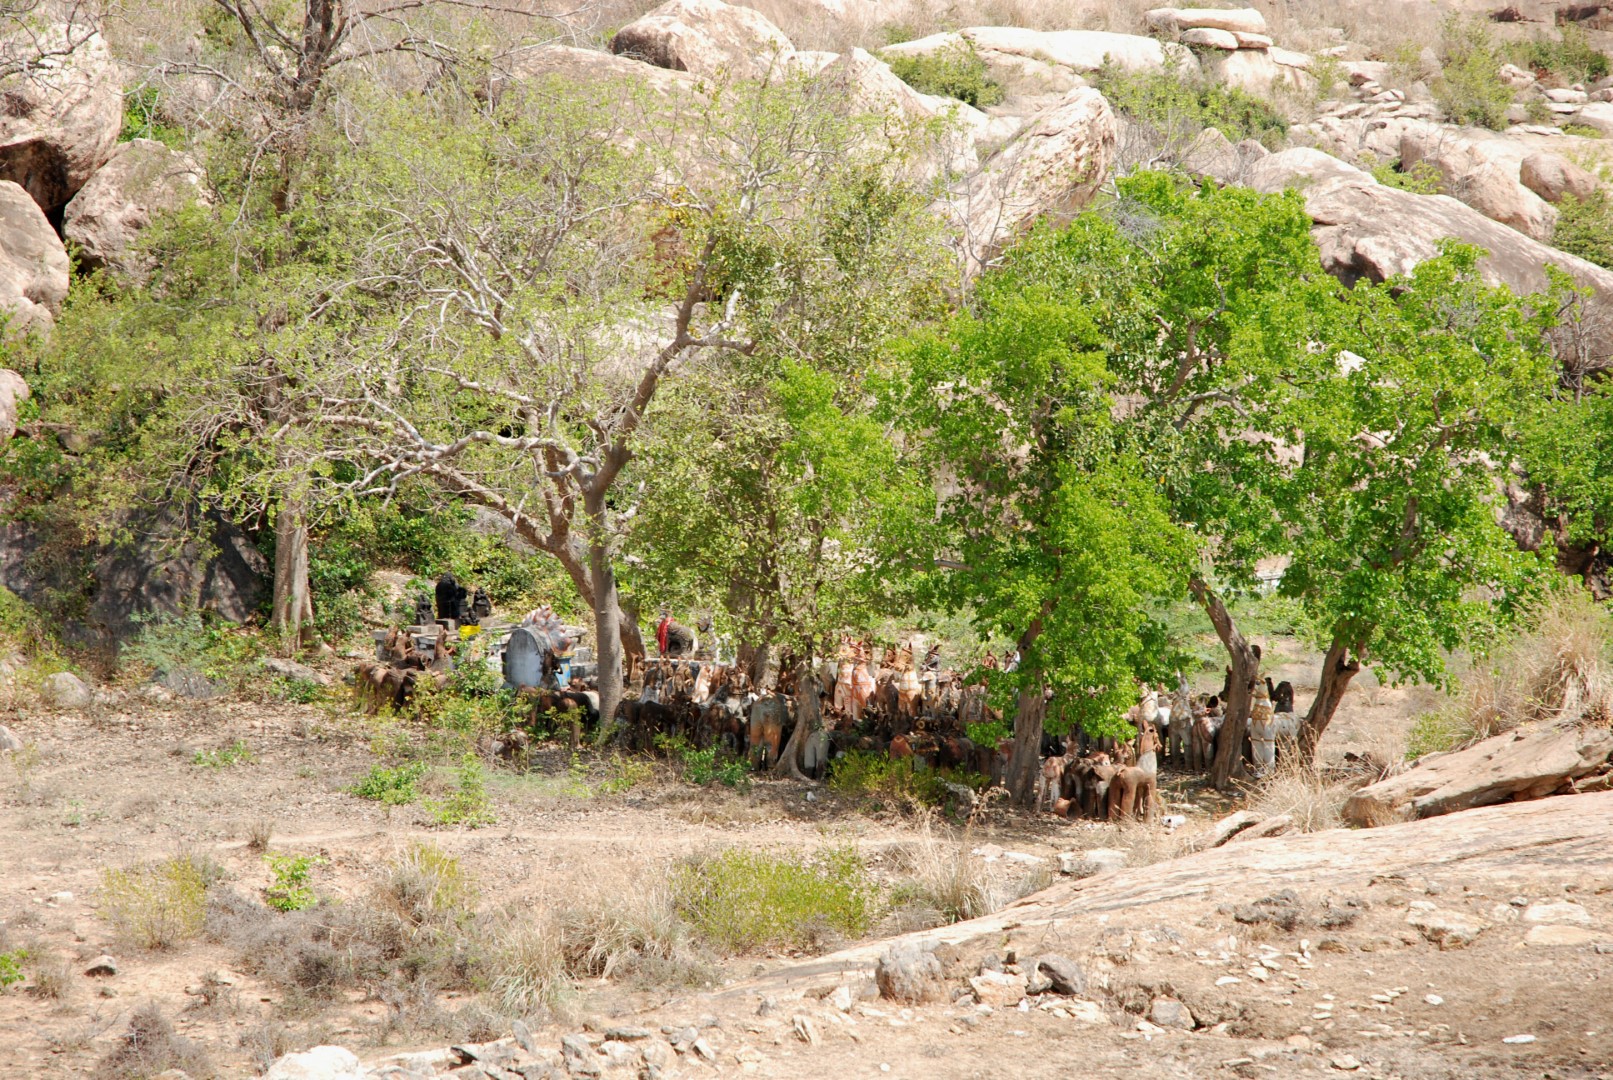 <span style="font-weight:normal;">An old shrine tucked away in a valley surrounded by boulders near Narthamalai. Despite its inaccessibility, it is very much alive and every year devotees from a nearby village celebrate Ayyanar at a small but dynamic three-day festival and give offerings of terracotta horses, elephants and cows.</span>